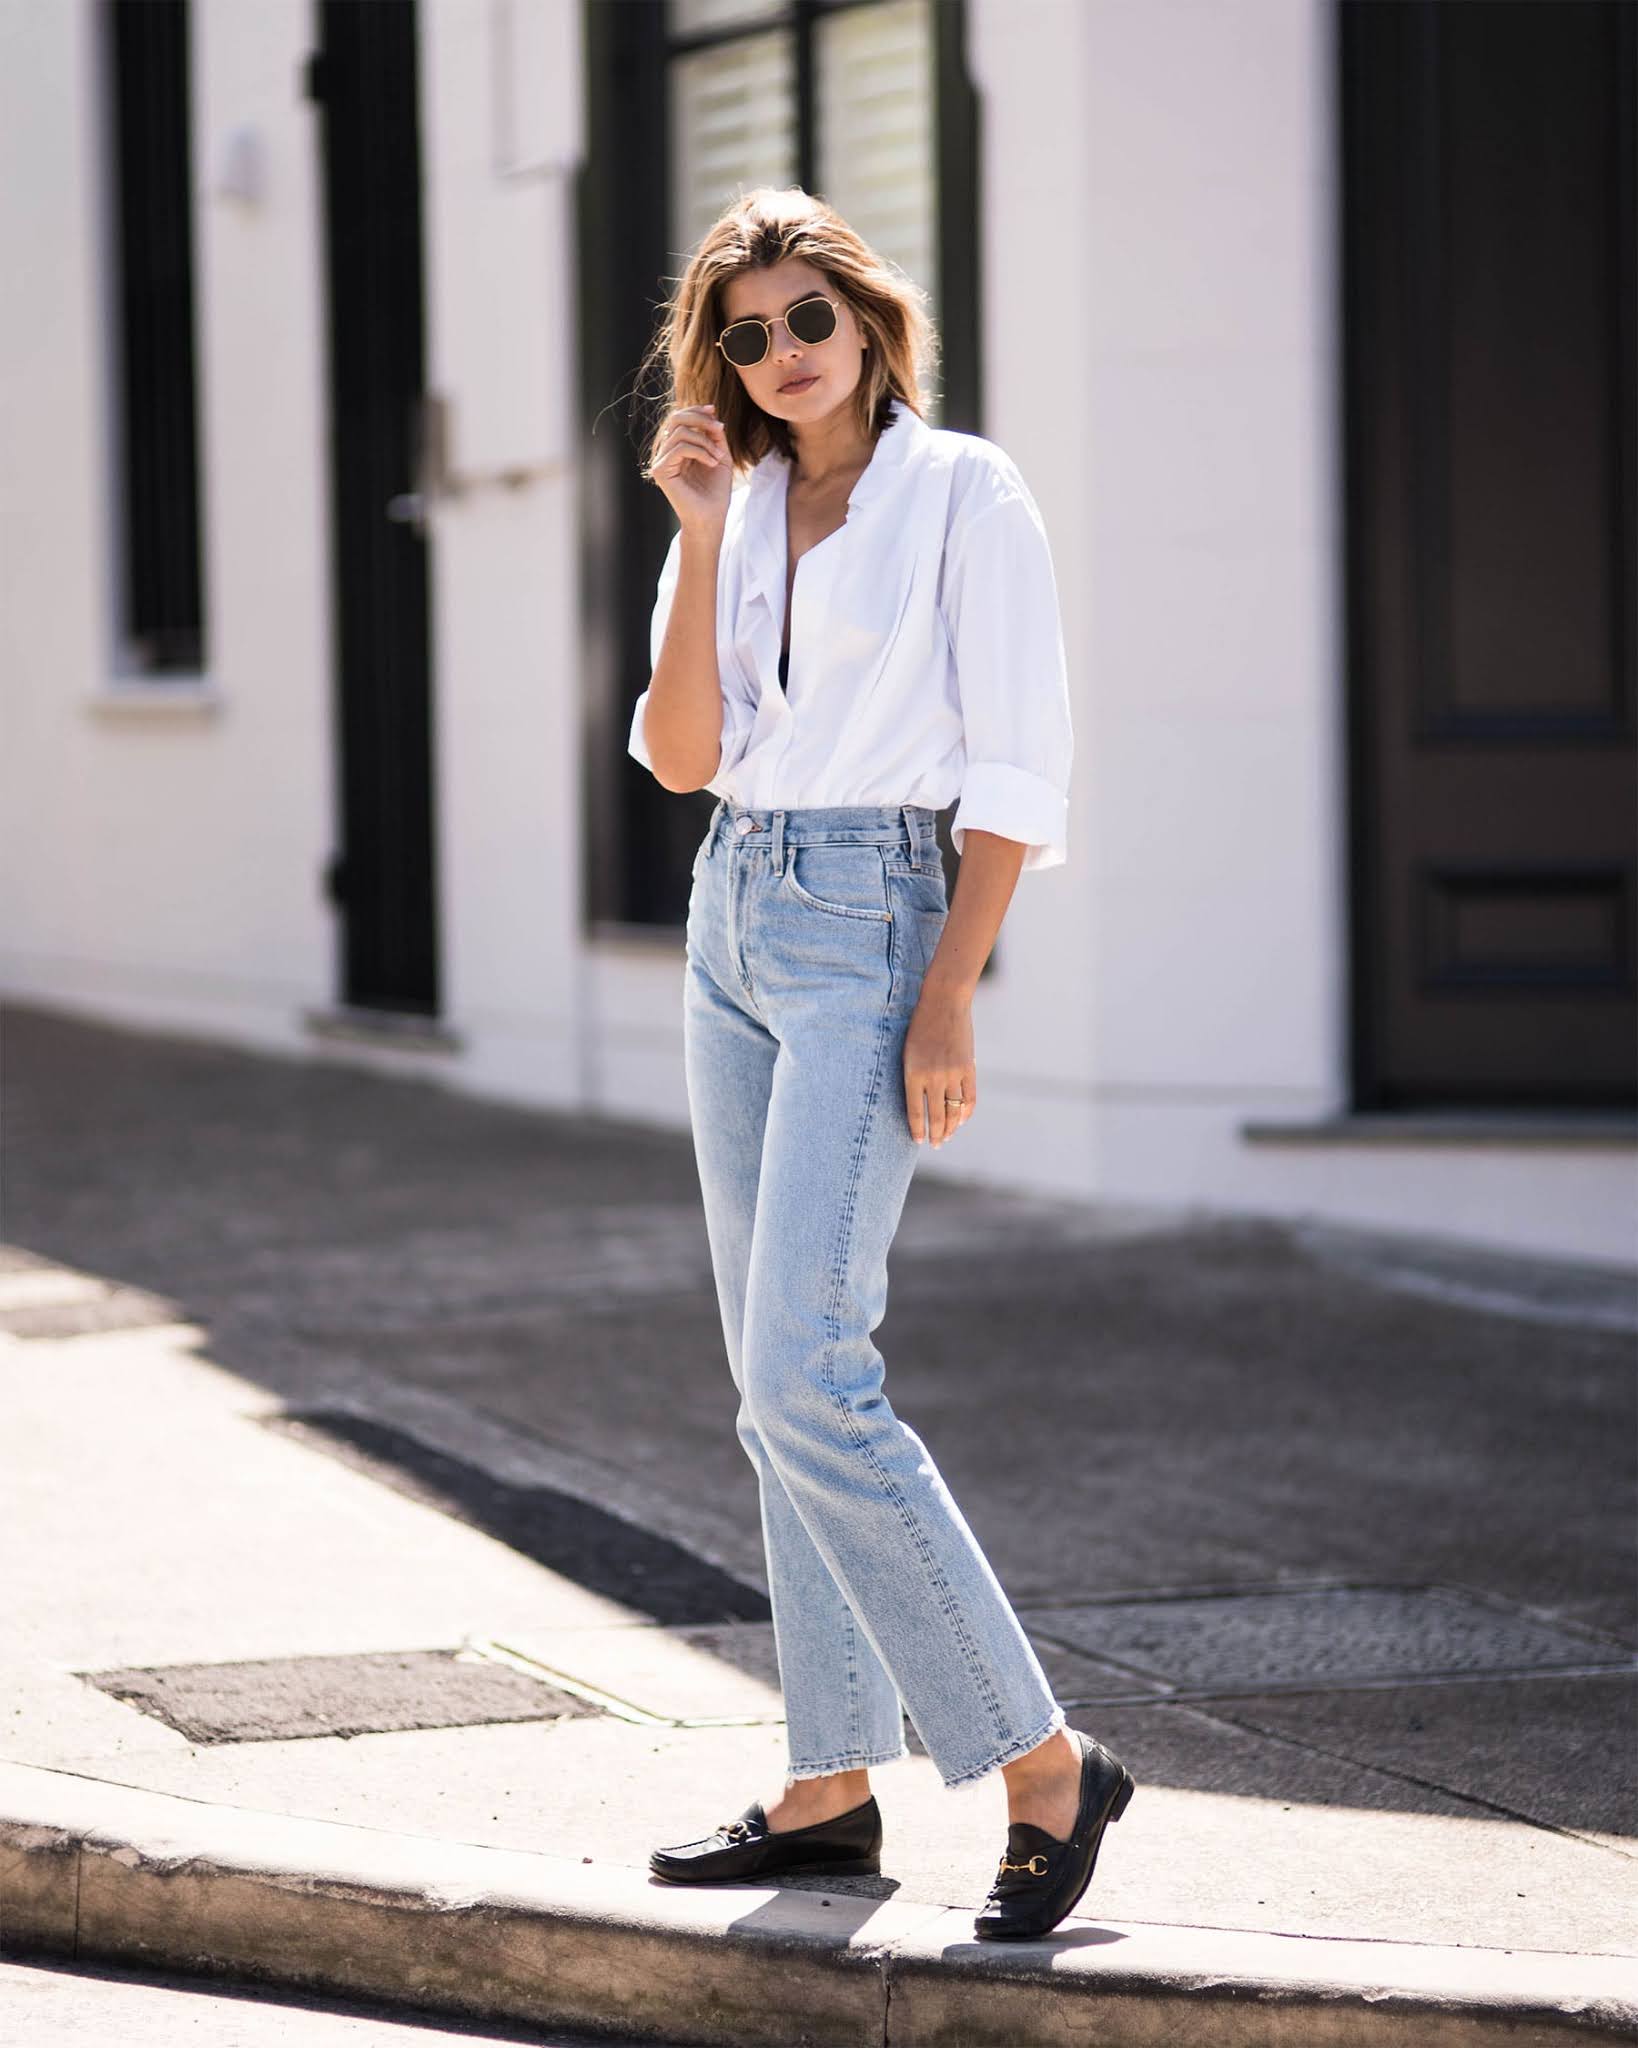 Get the Ultimate Denim Look With 4 Under-$100 Pieces